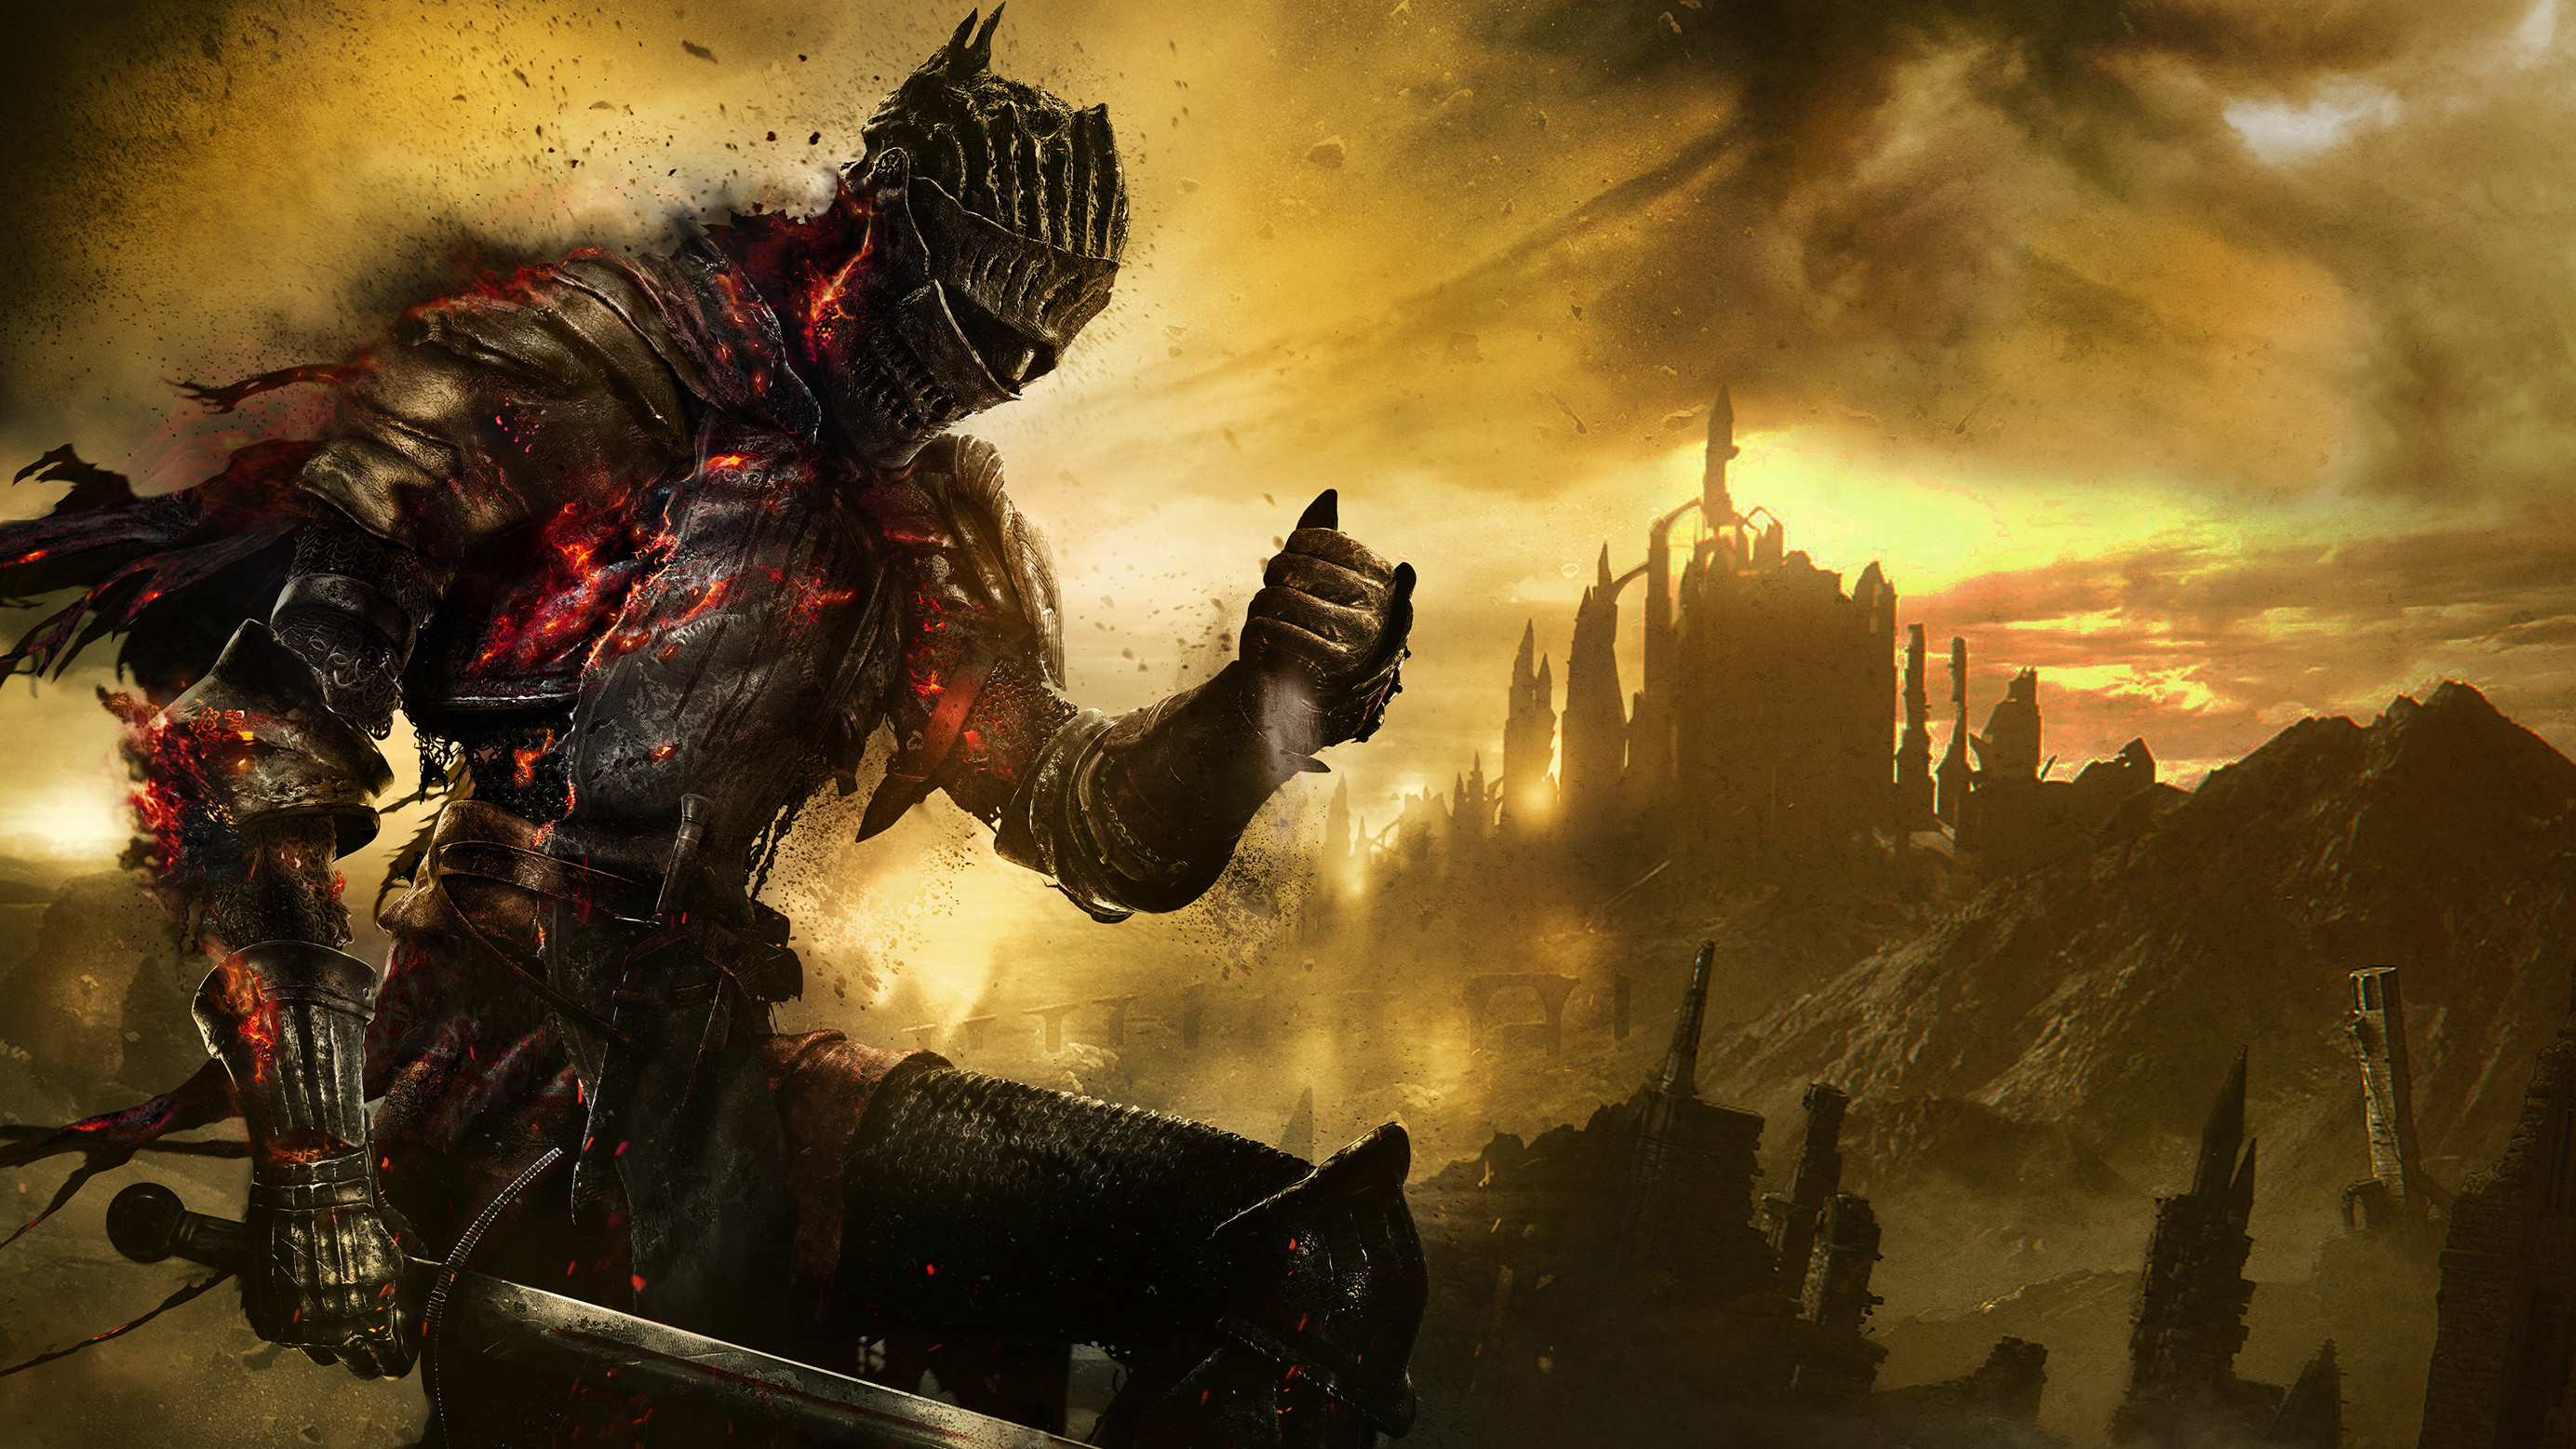 2768x1557 Explore More Wallpapers in the Dark Souls III Subcategory!